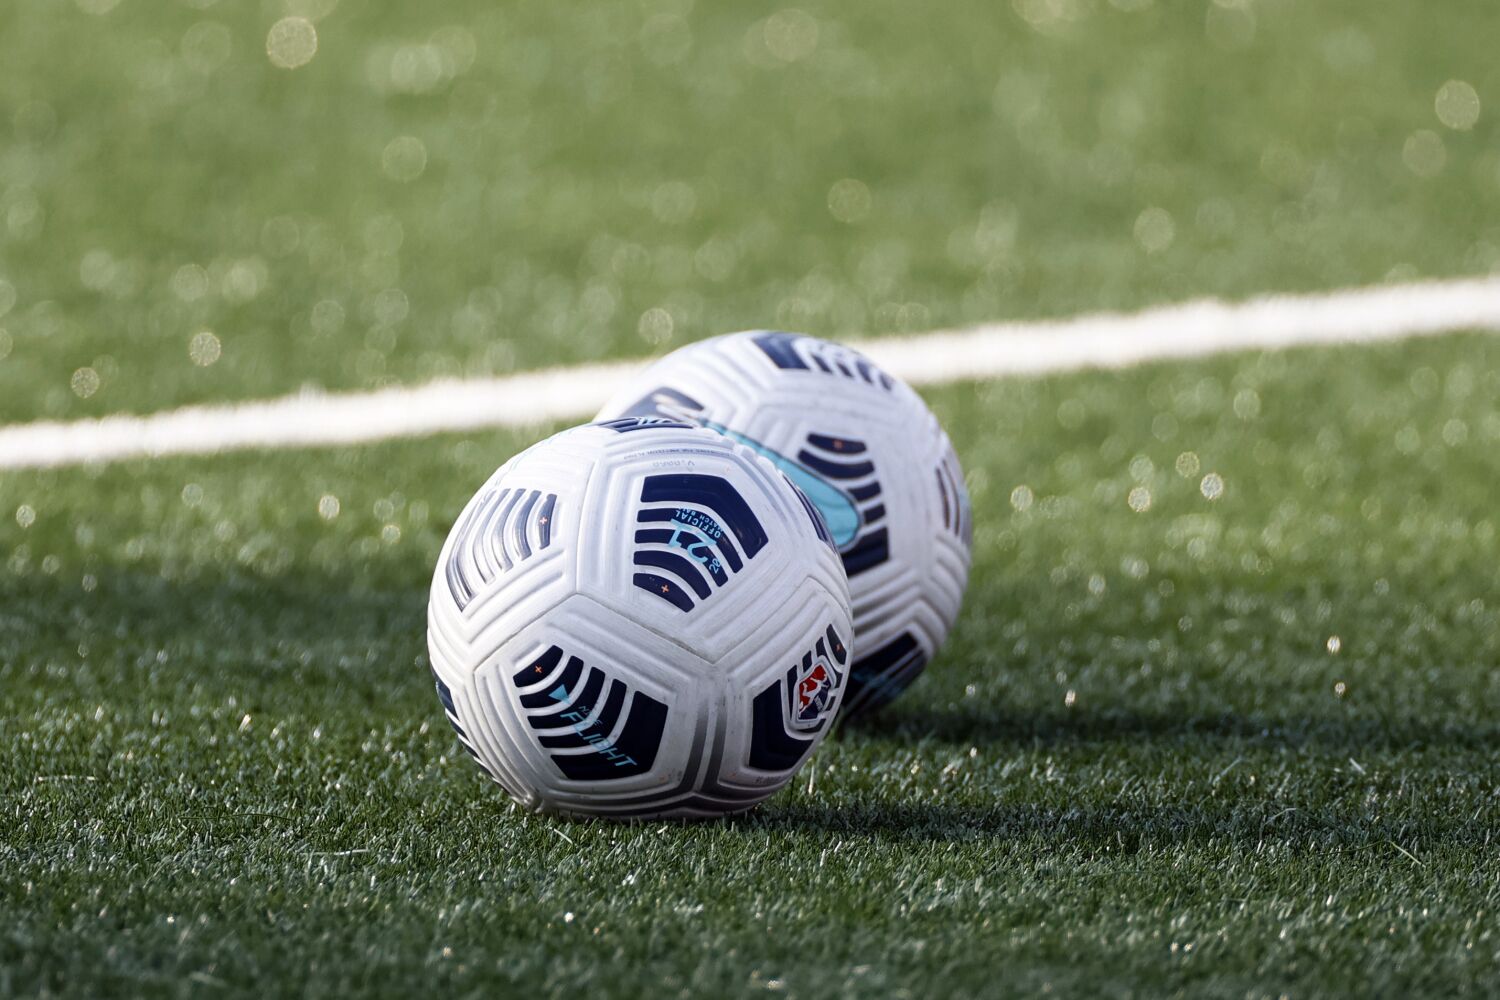 High school girls' soccer: Southern Section wild-card results and updated pairings